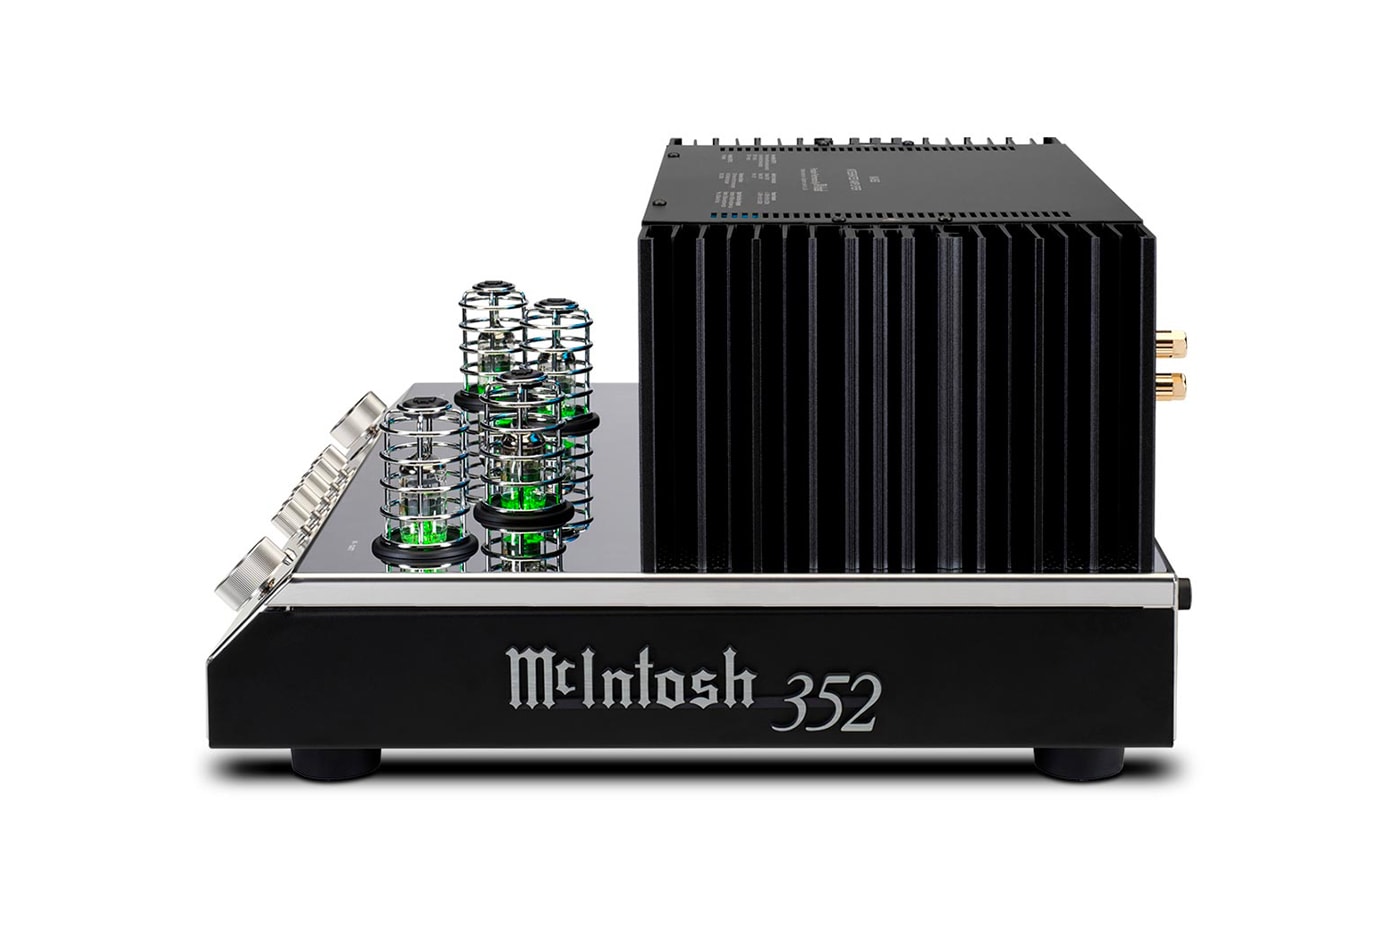 McIntosh Labs Releases MA352 Integrated Amplifier audio equipment design vacuum tube solid state design buy now hybrid 200 Watts into 8 Ohms 320 Watts into 4 Ohms 5-band tone control